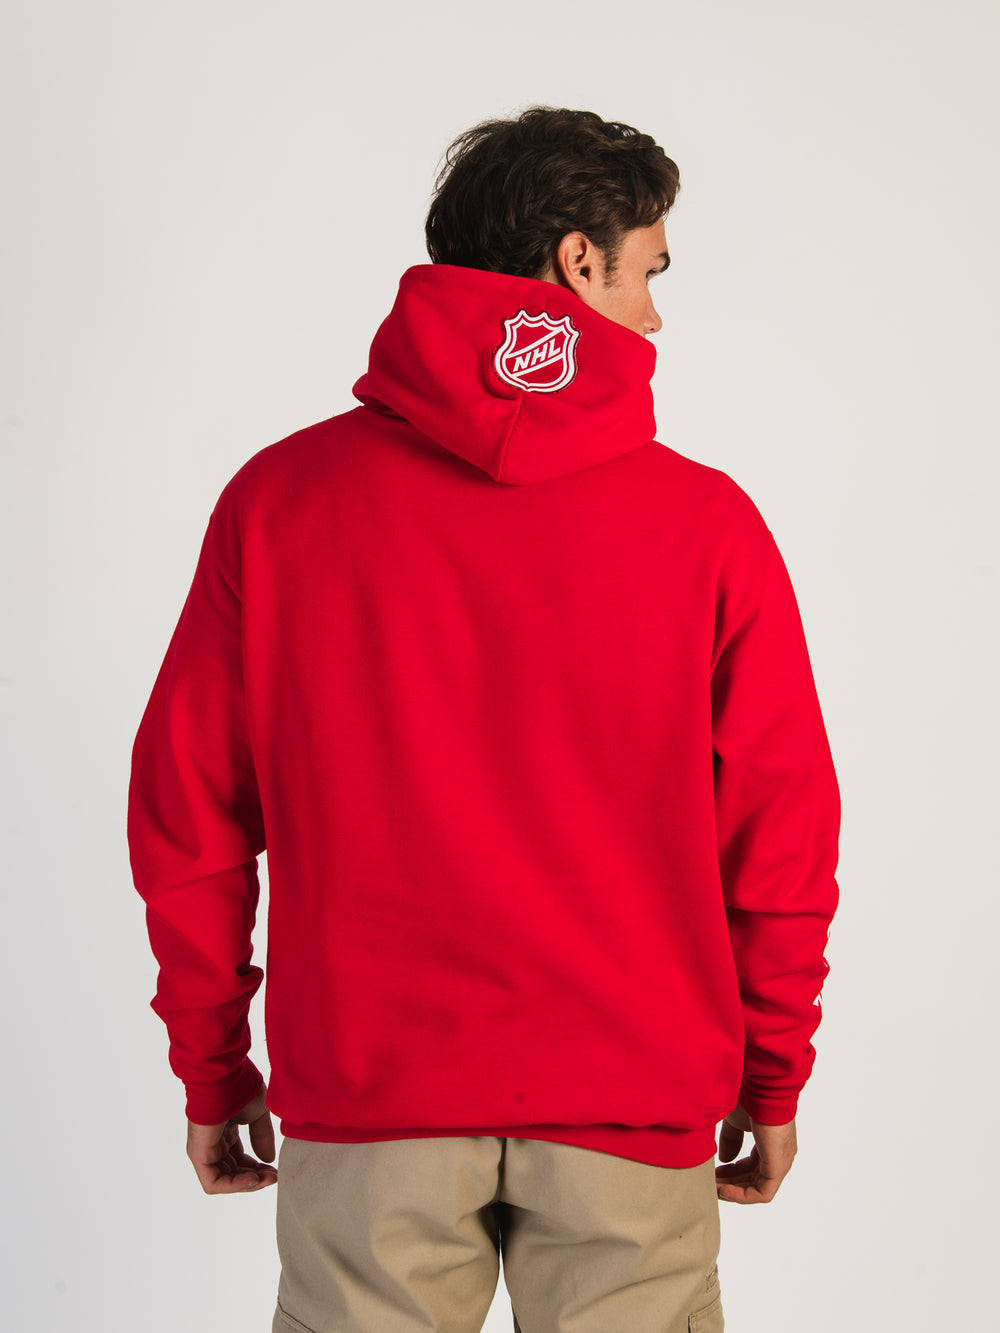 CHAMPION NHL DETROIT RED WINGS CENTER ICE PULL OVER HOODIE